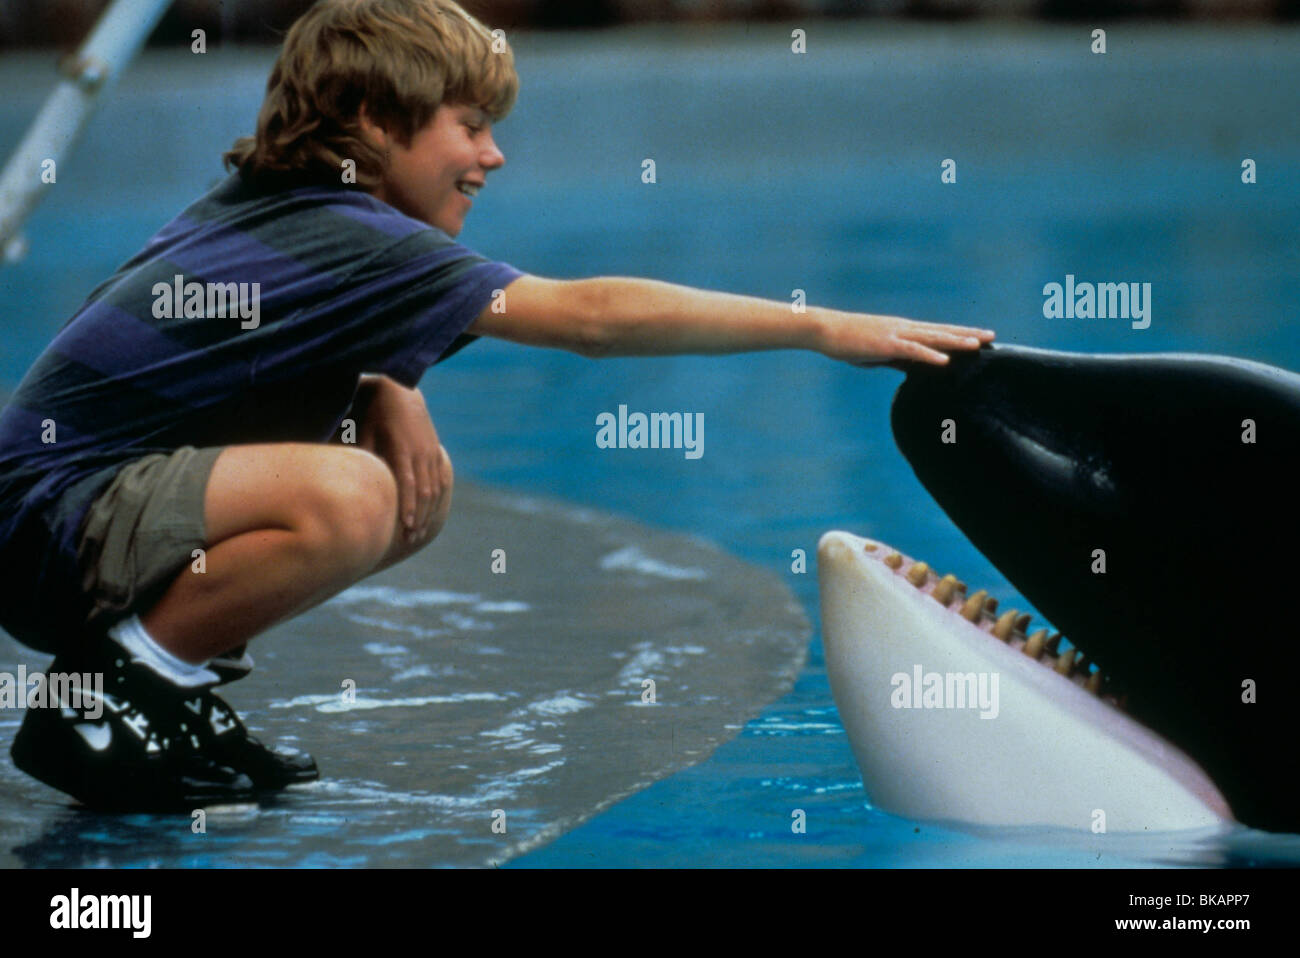 FREE WILLY (1993) JASON JAMES RICHTER FWLY 015 MOVIESTORE COLLECTION LTD Stock Photo